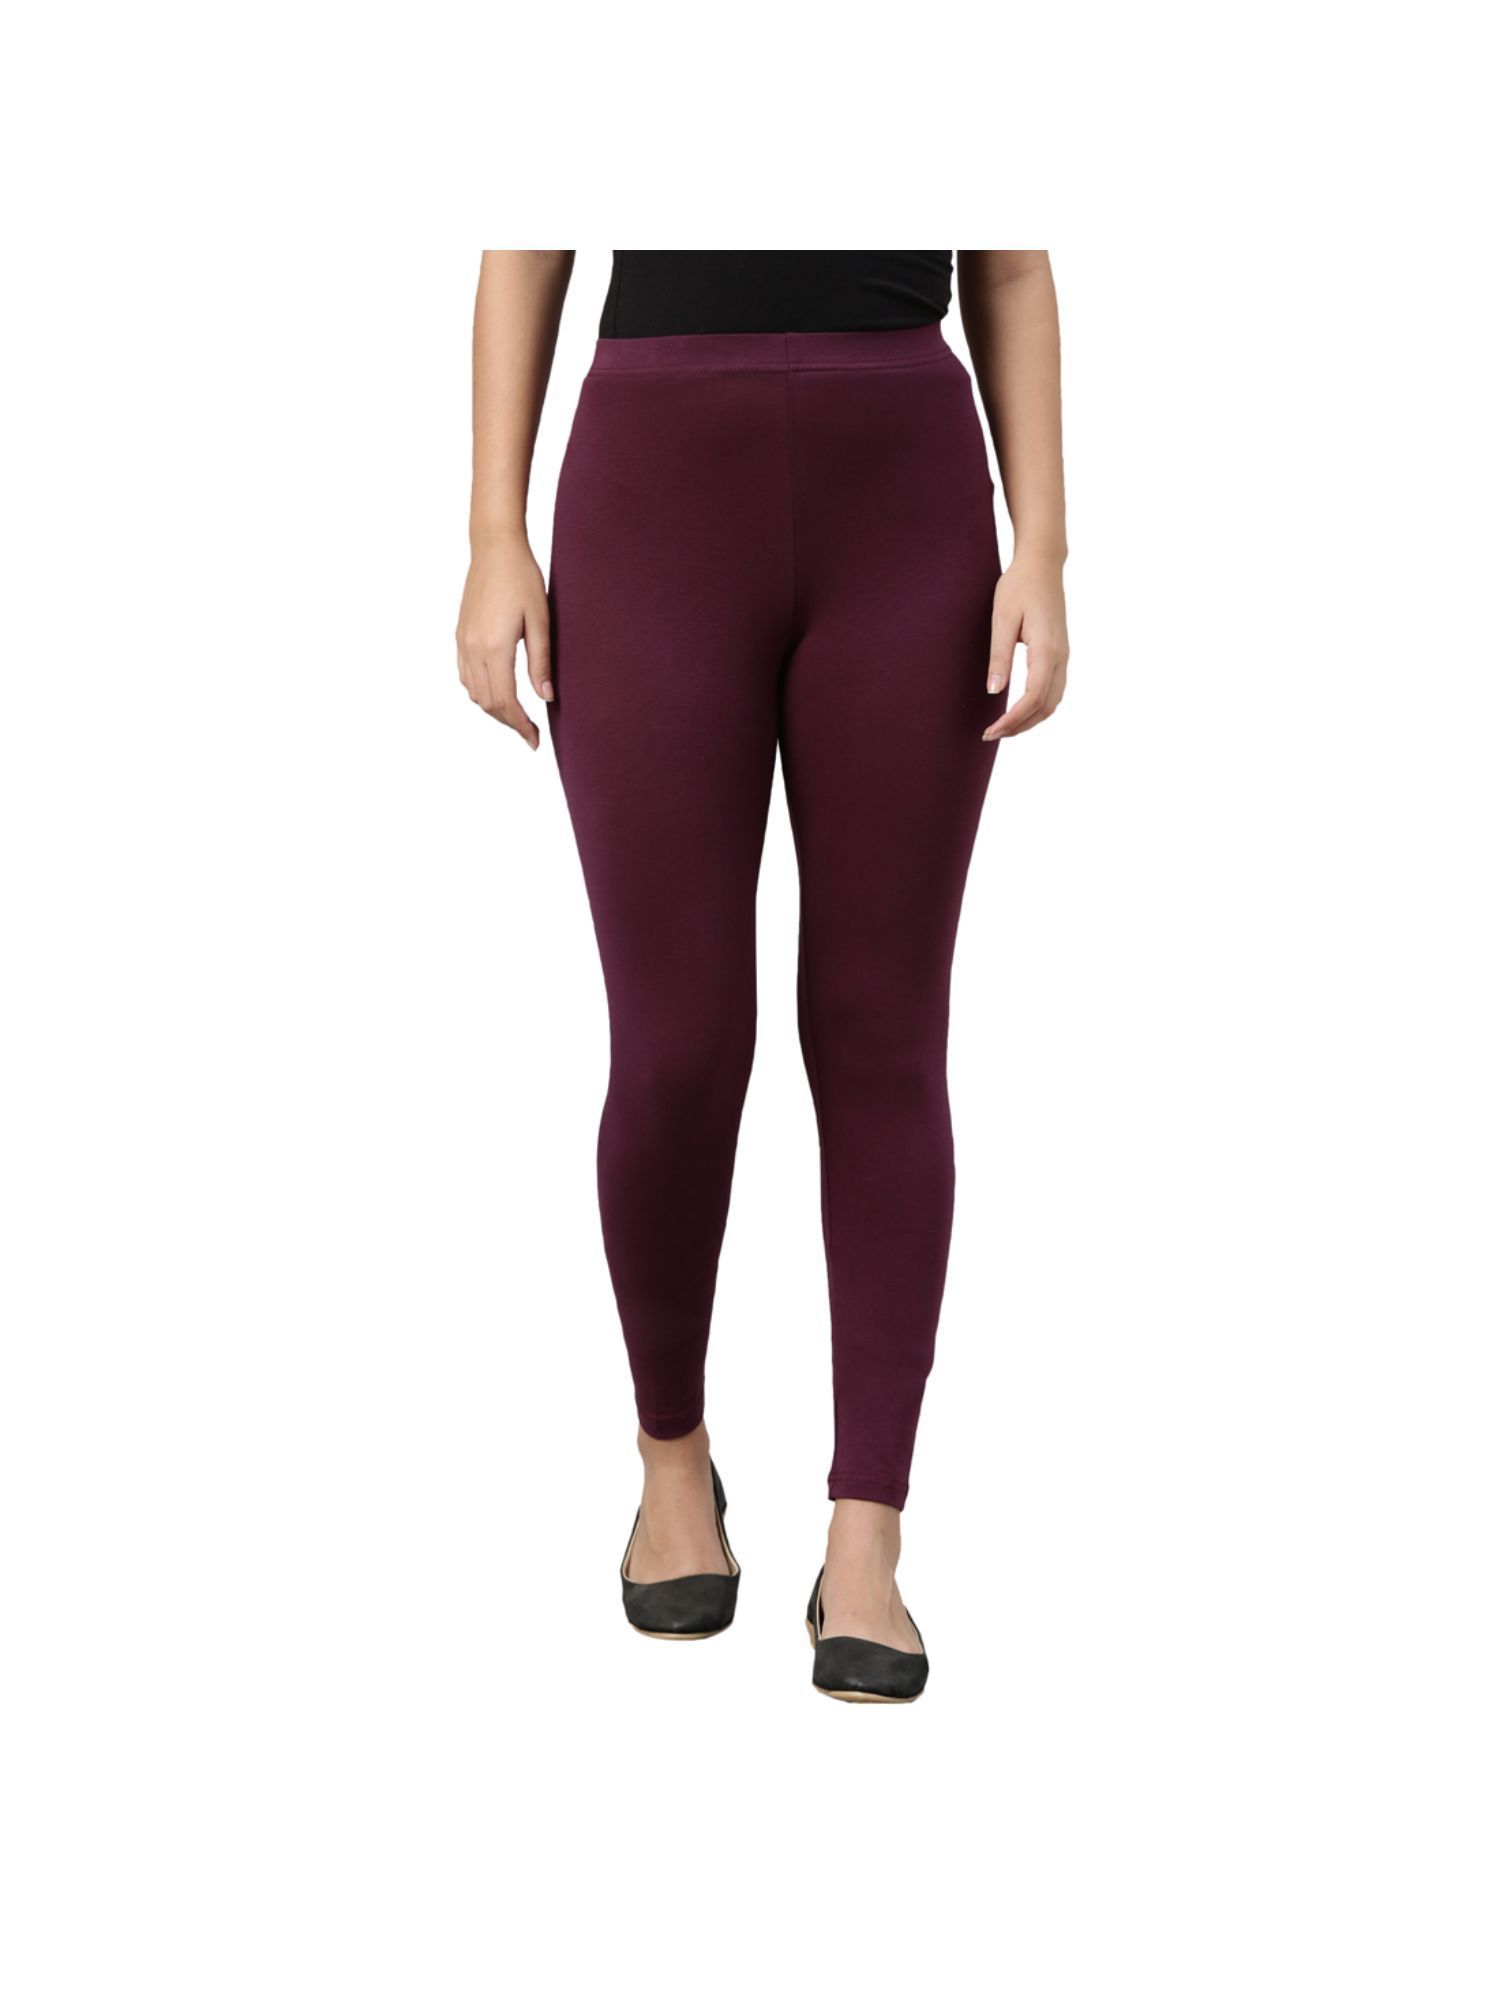 High Waist Grey Solid Women Maroon Tights, Slim Fit at Rs 230 in New Delhi